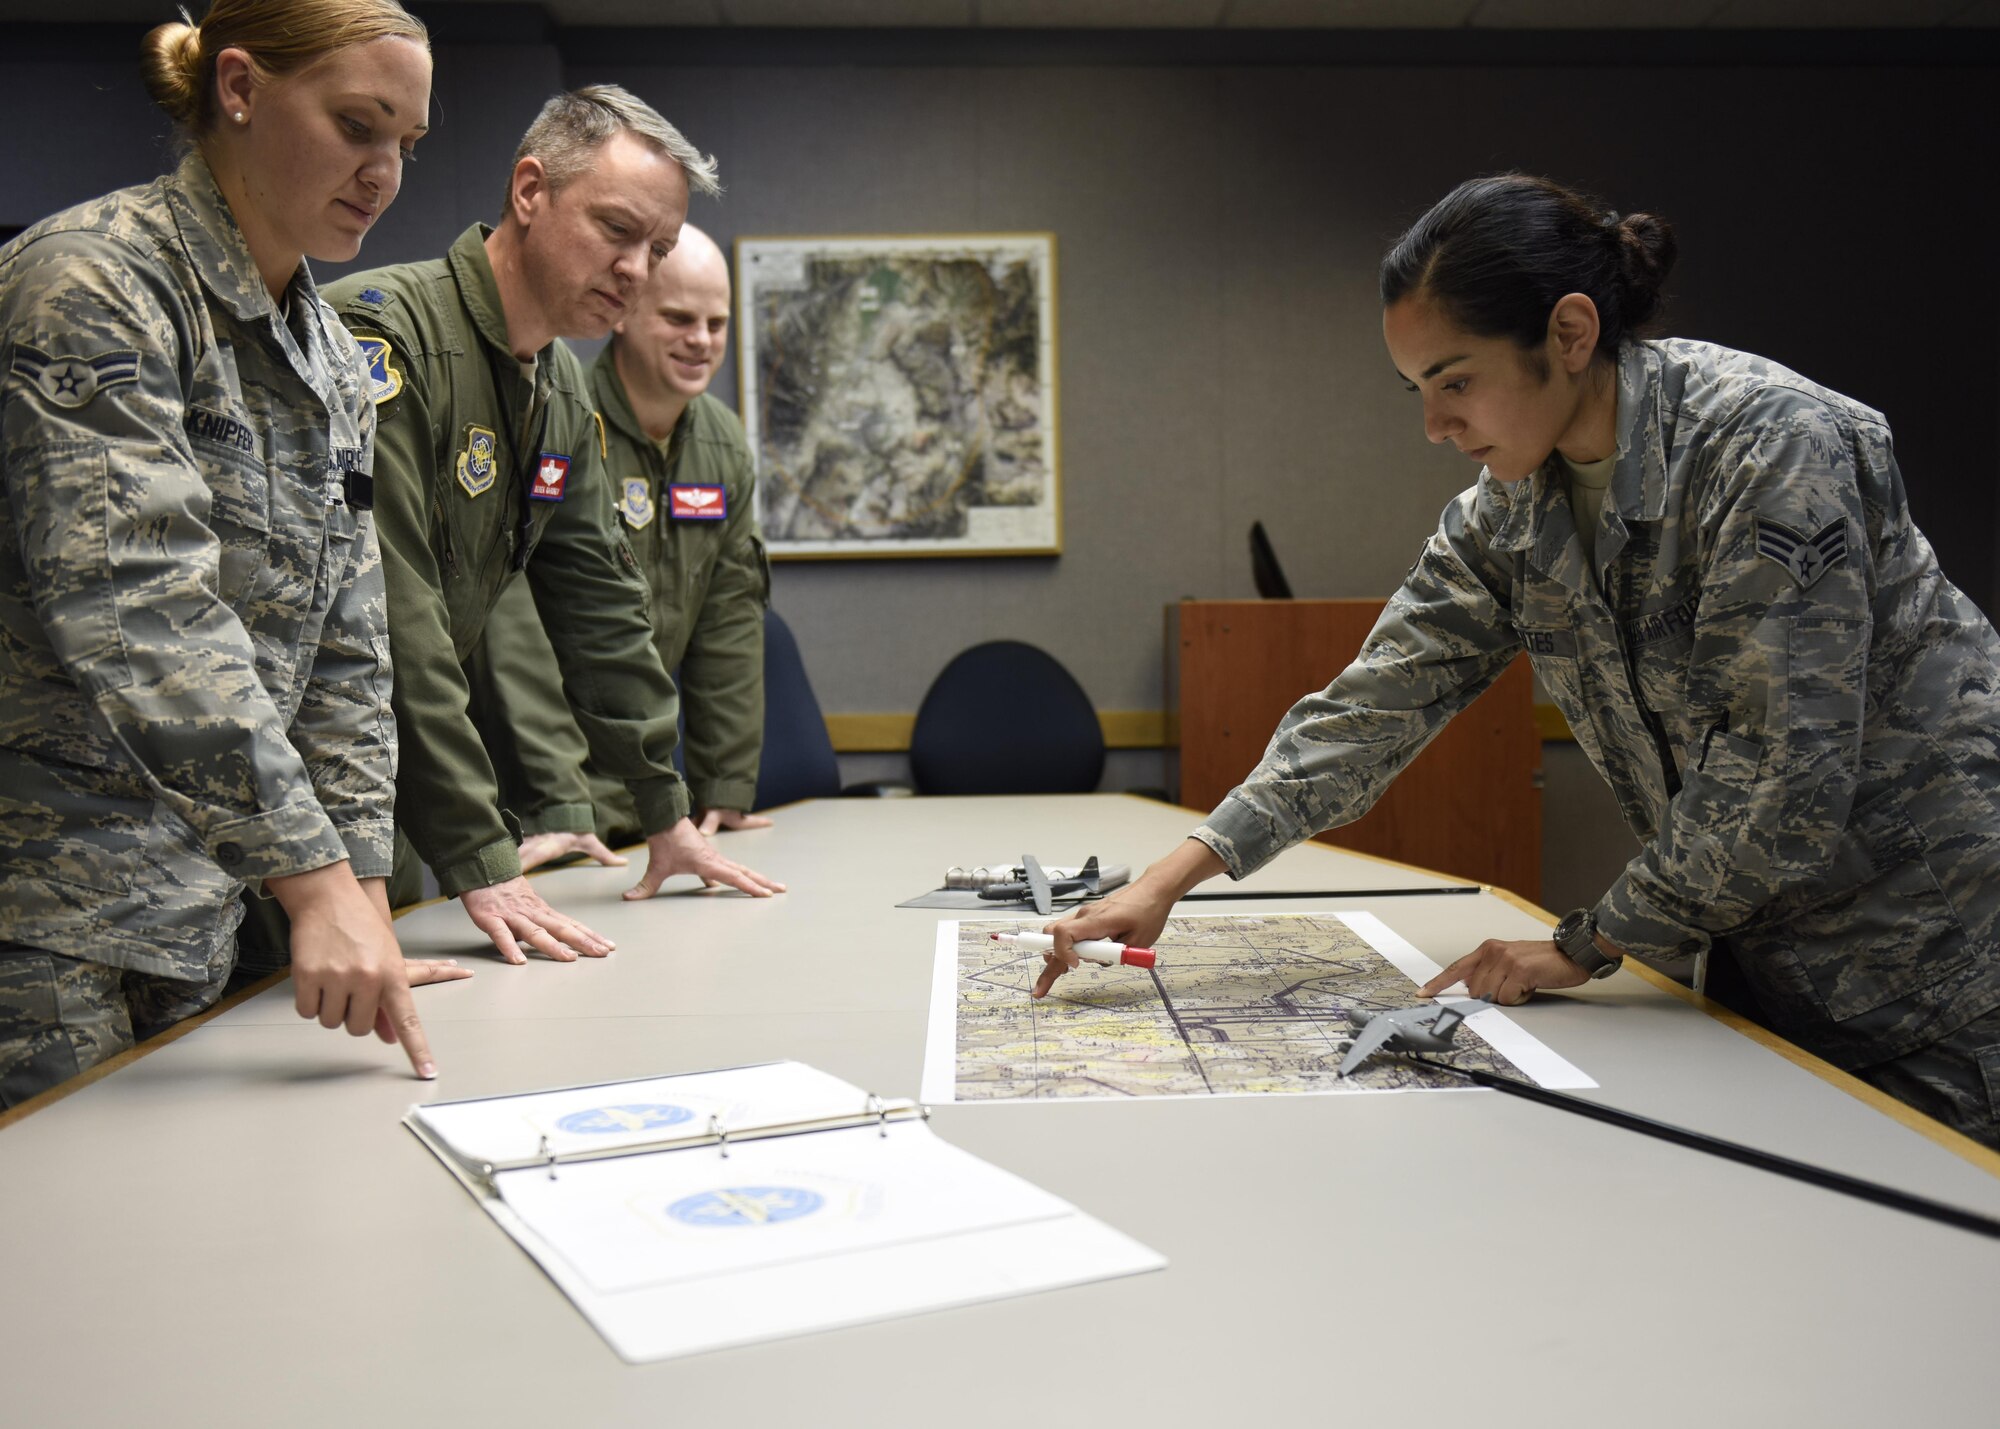 Senior Airman Brittany Fuentes, a collection requirements manager at Air Mobility Command, briefs information regarding a mobility mission to other anylysts July 18, 2017. (U.S. Air Force photo by Staff Sgt. Stephenie Wade)